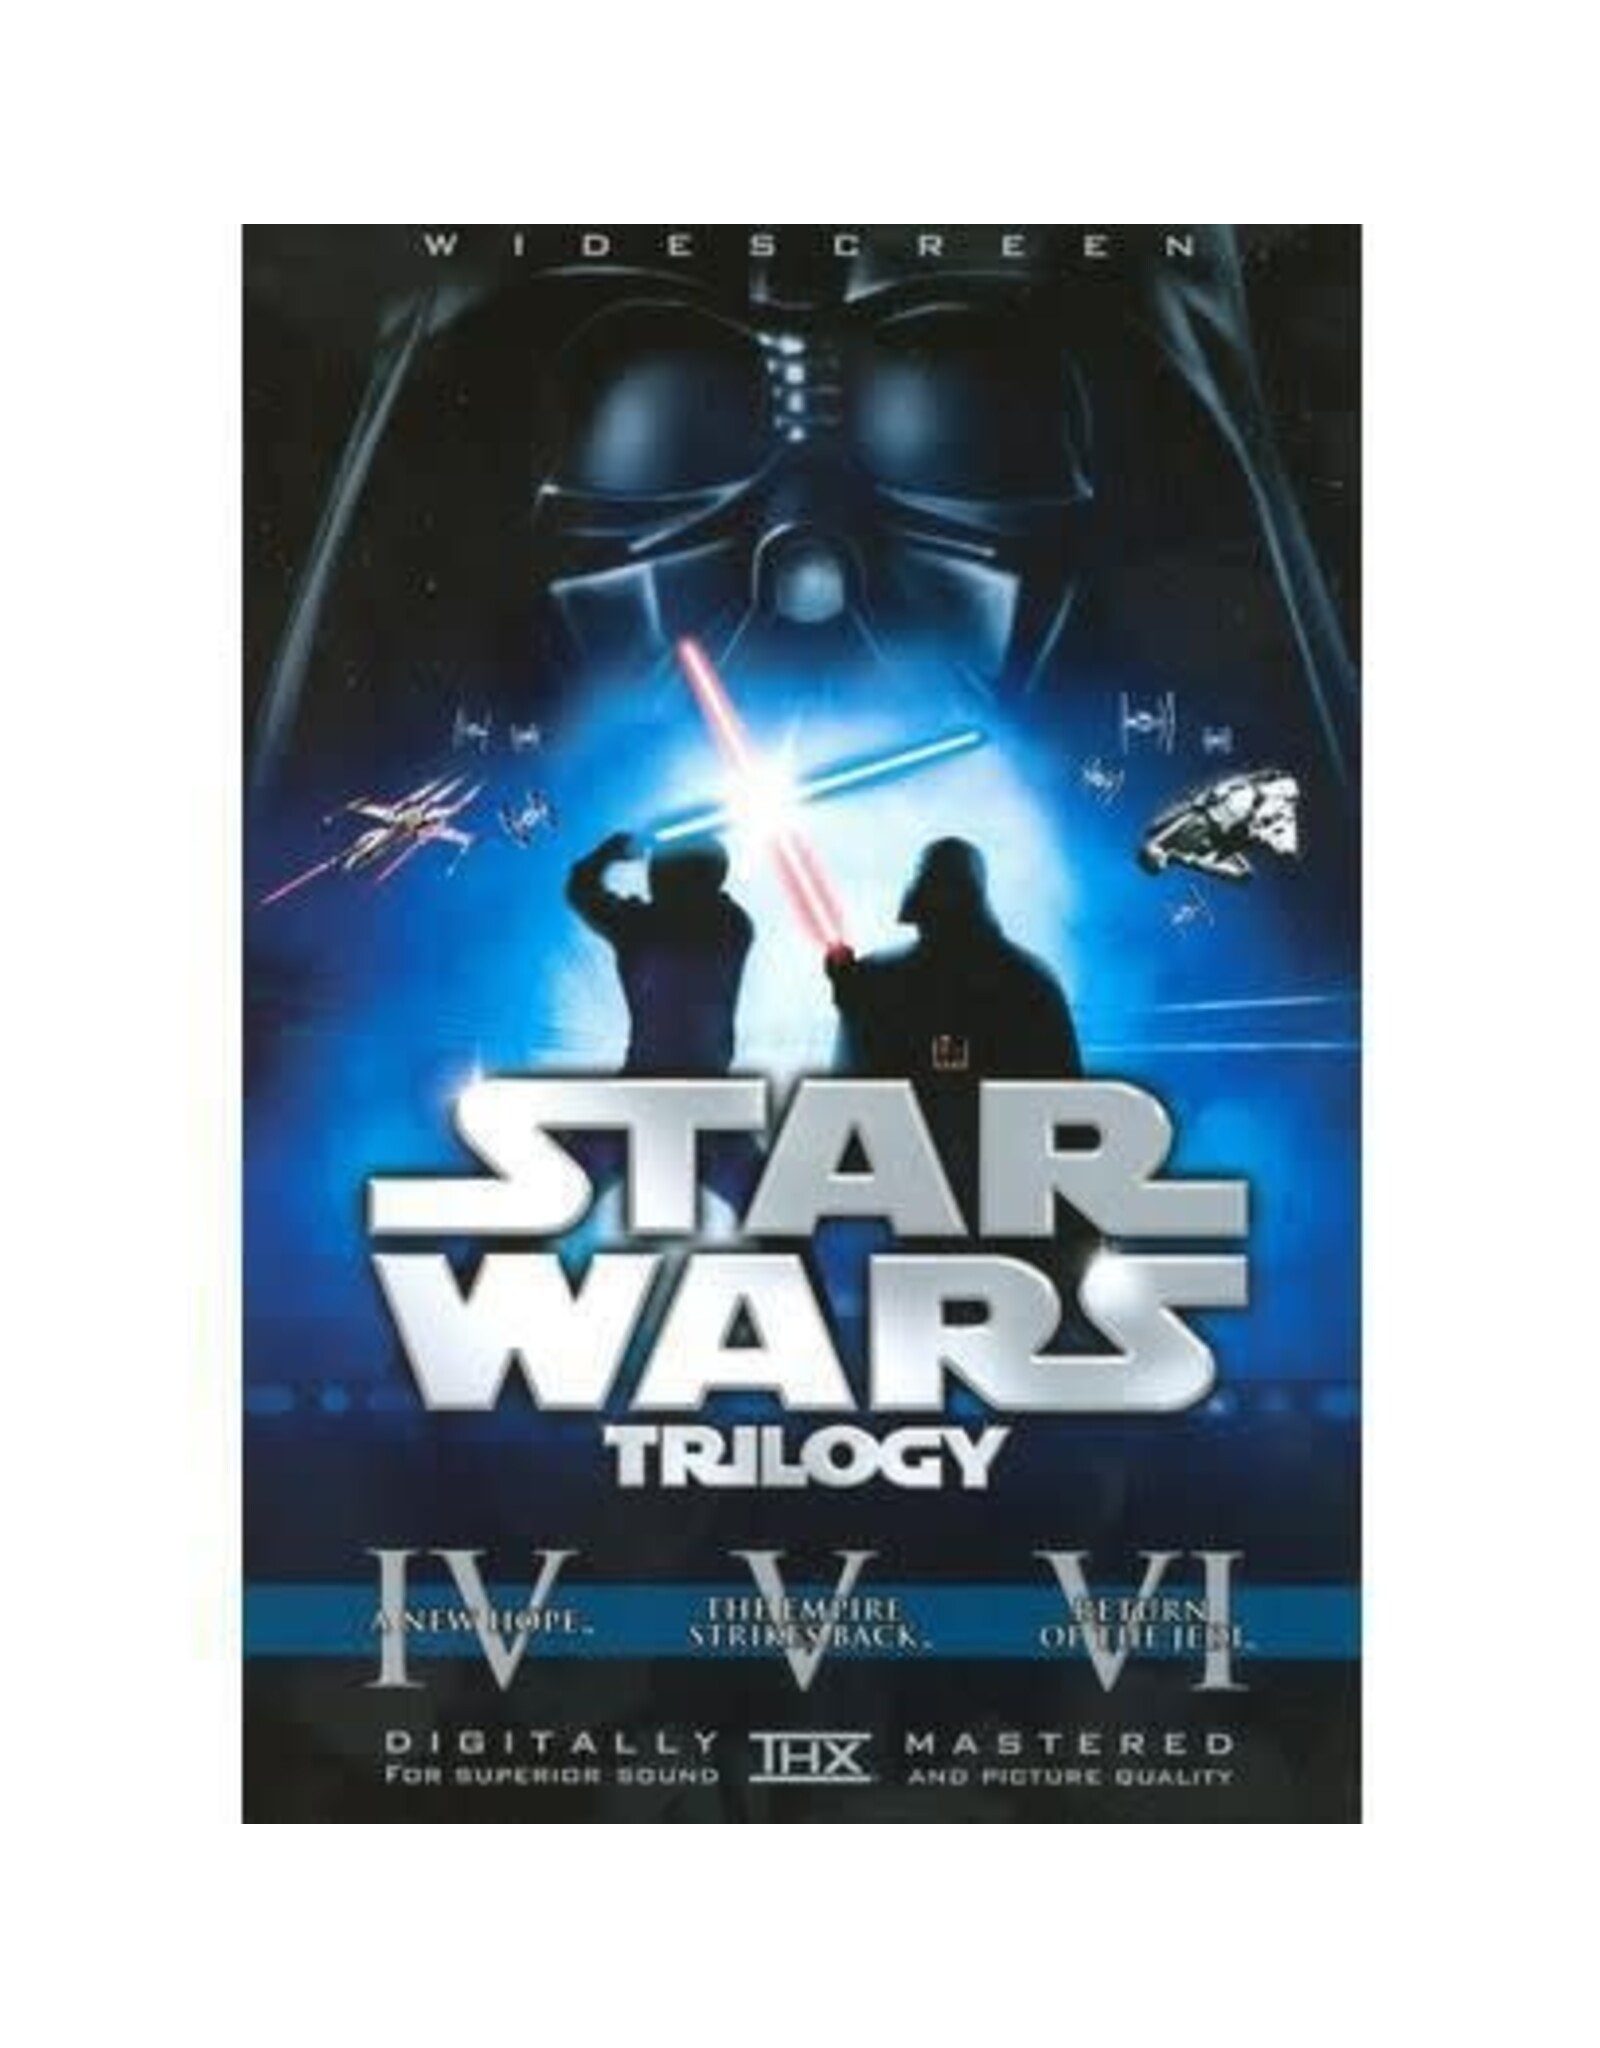 Cult & Cool Star Wars Original Trilogy with Theatrical Cuts Box Set (Brand New)